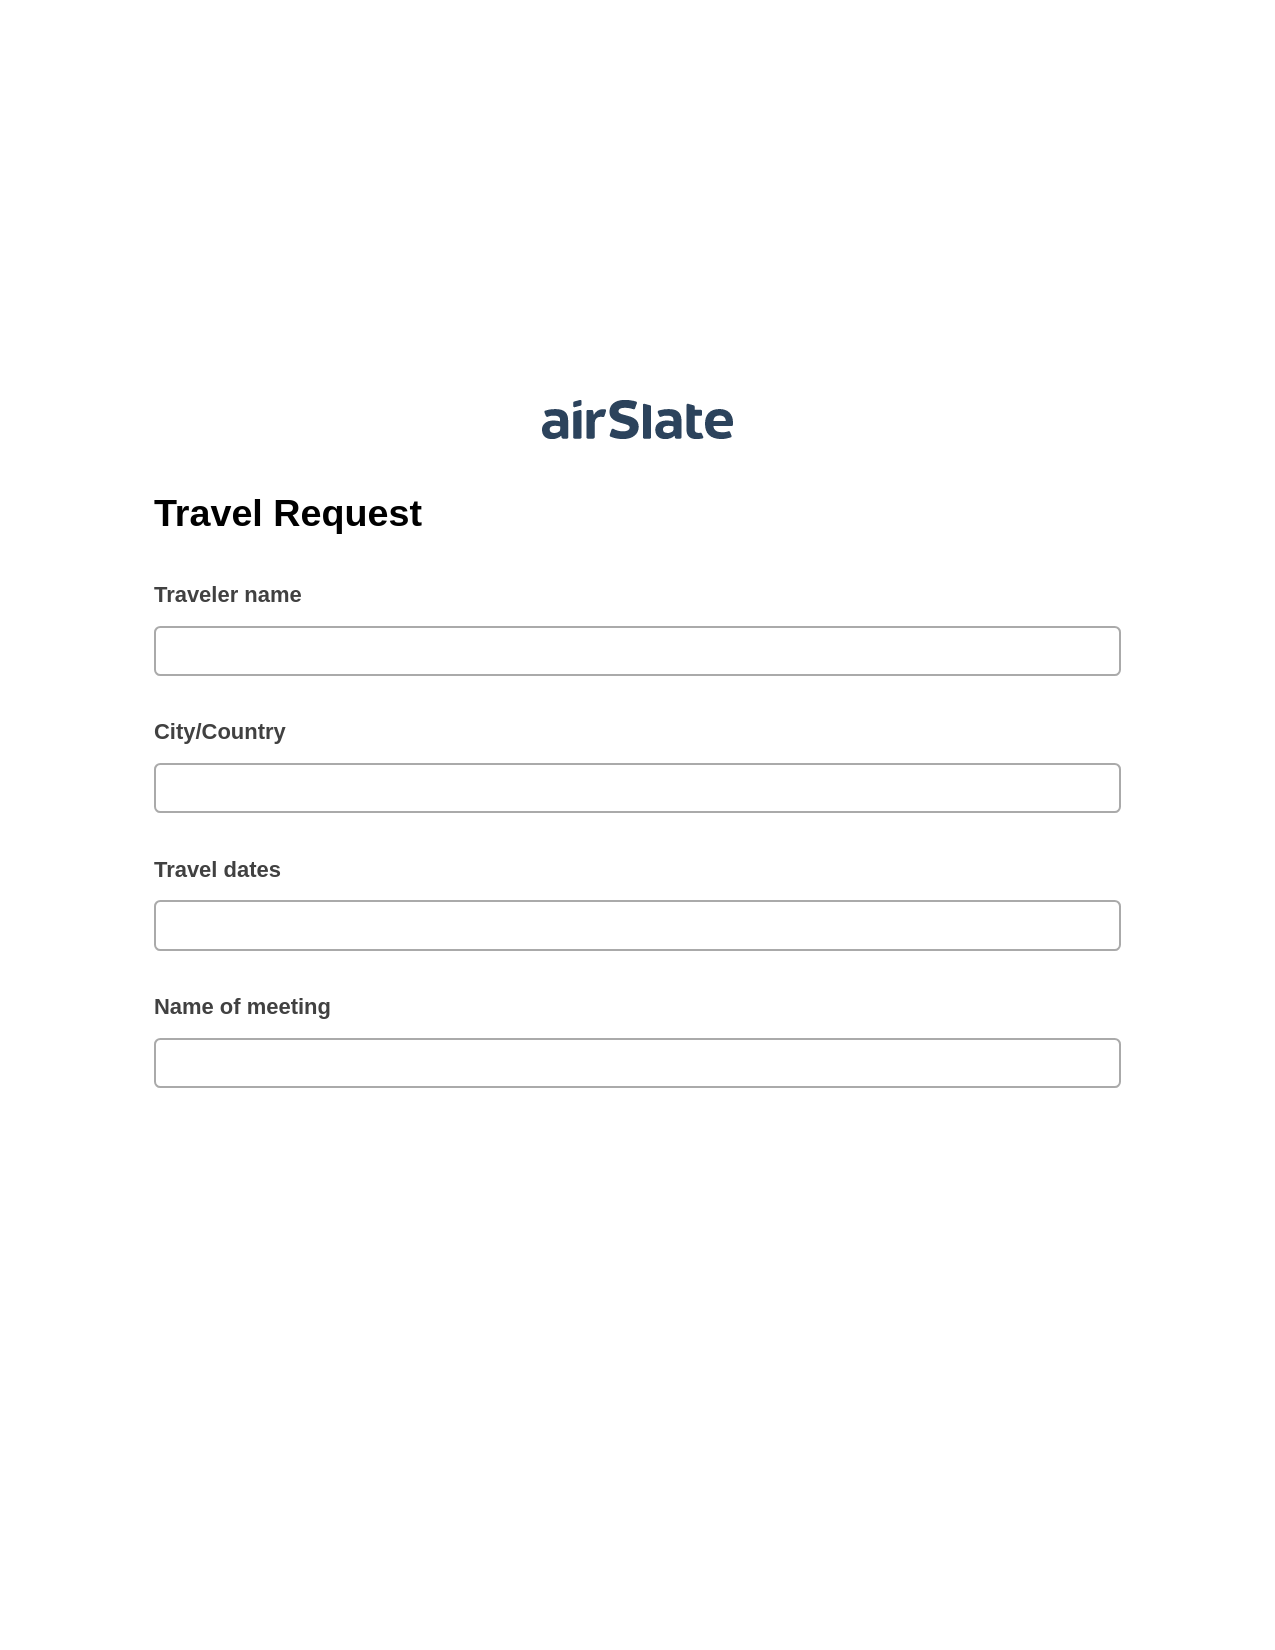 Travel Request Pre-fill from another Slate Bot, Create slate from another Flow Bot, Dropbox Bot